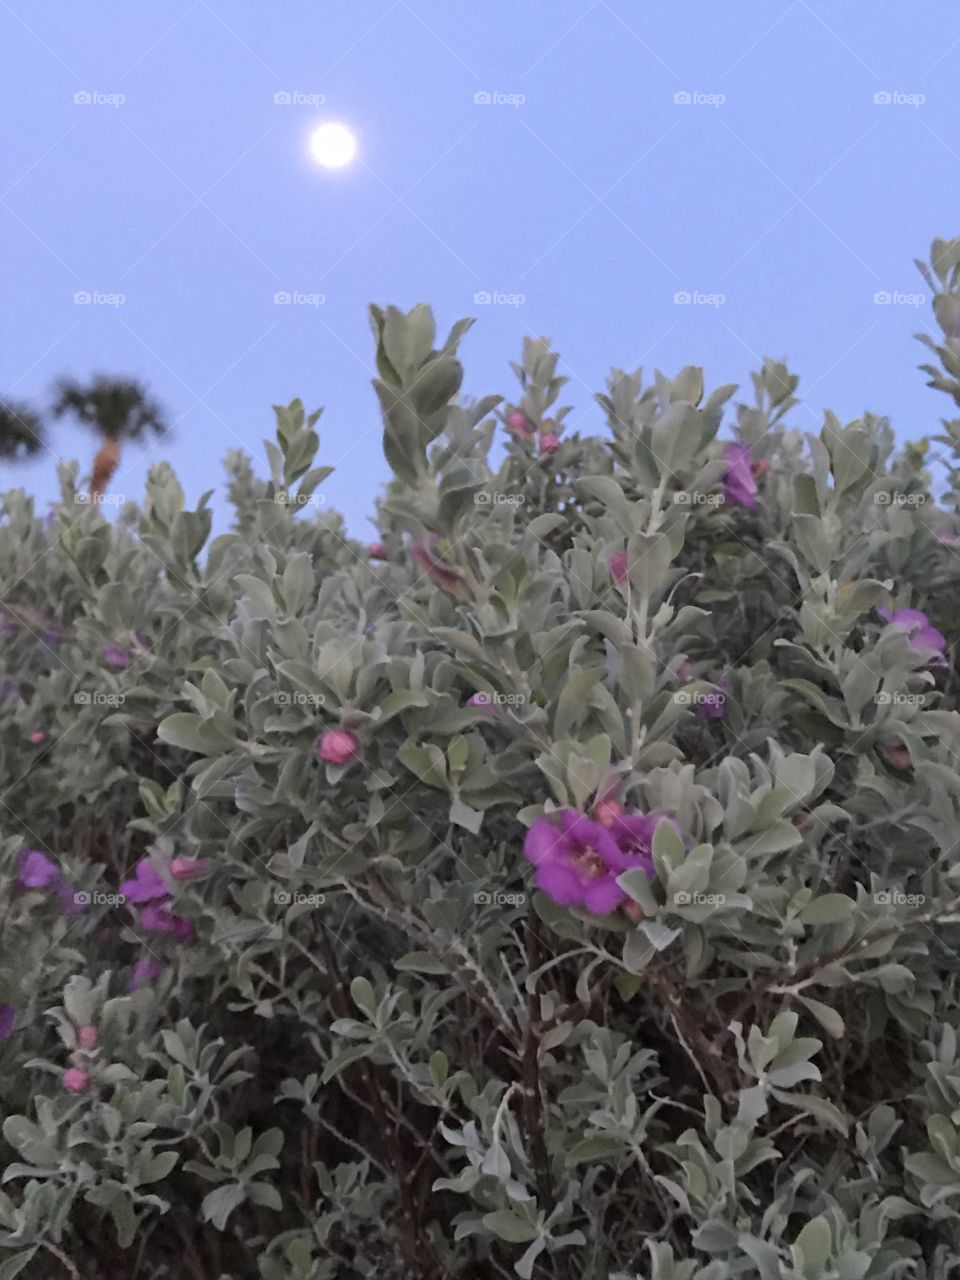 Floral bush under a full moon before sunset